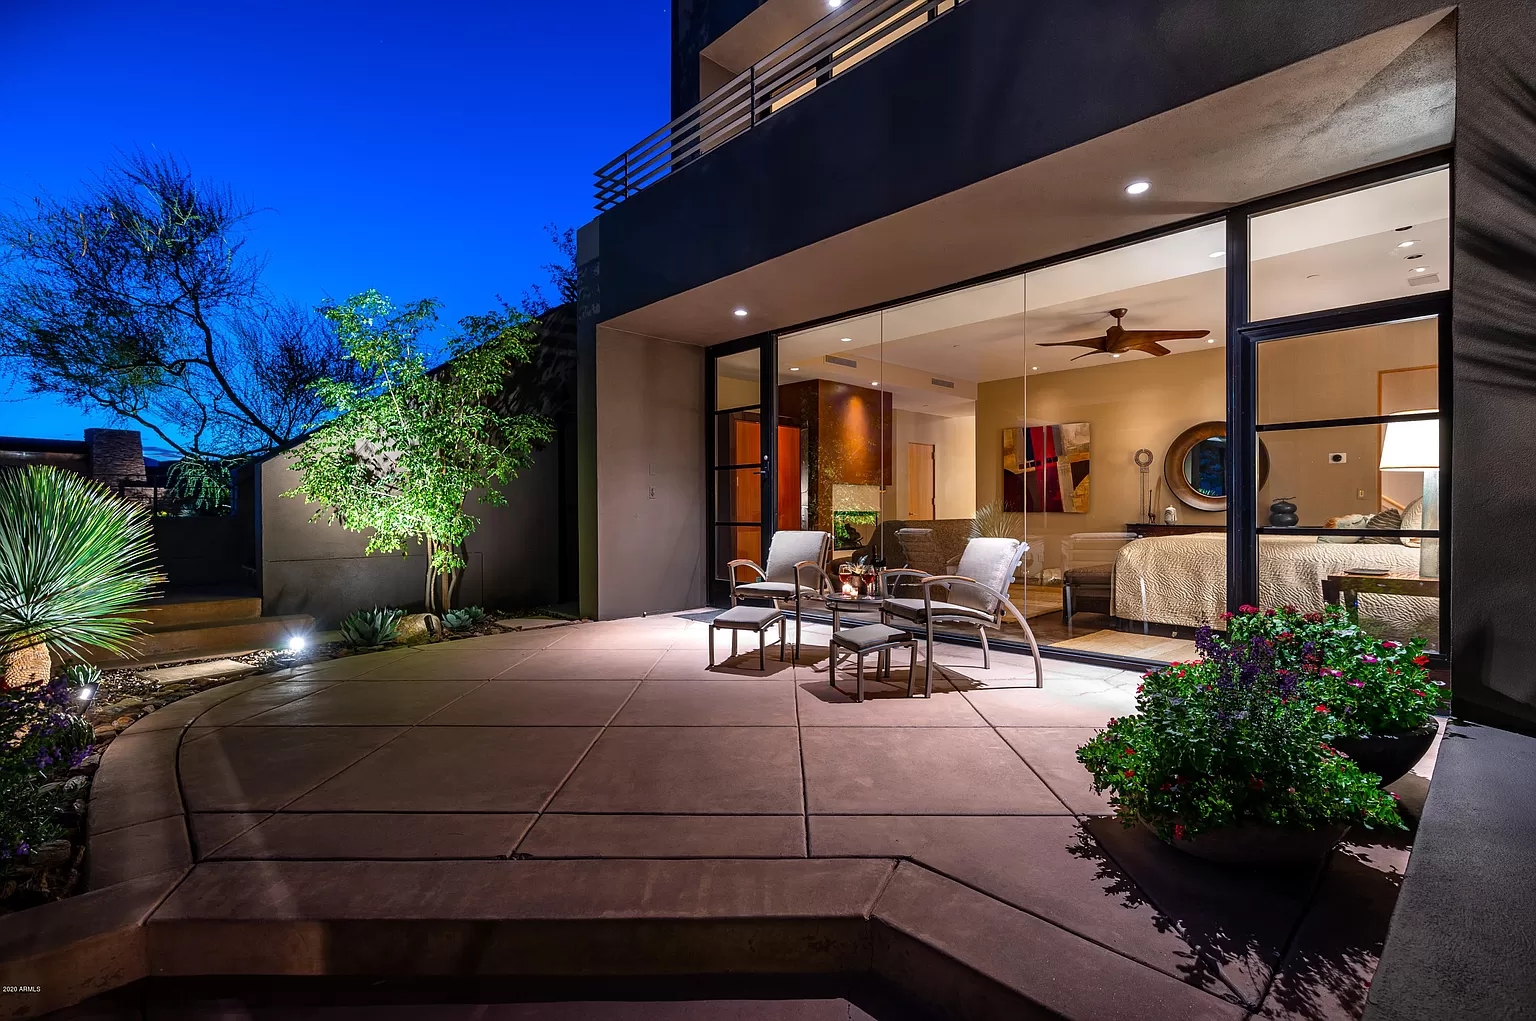 A-Home-with-Modern-Cubist-Design-in-Scottsdale-22